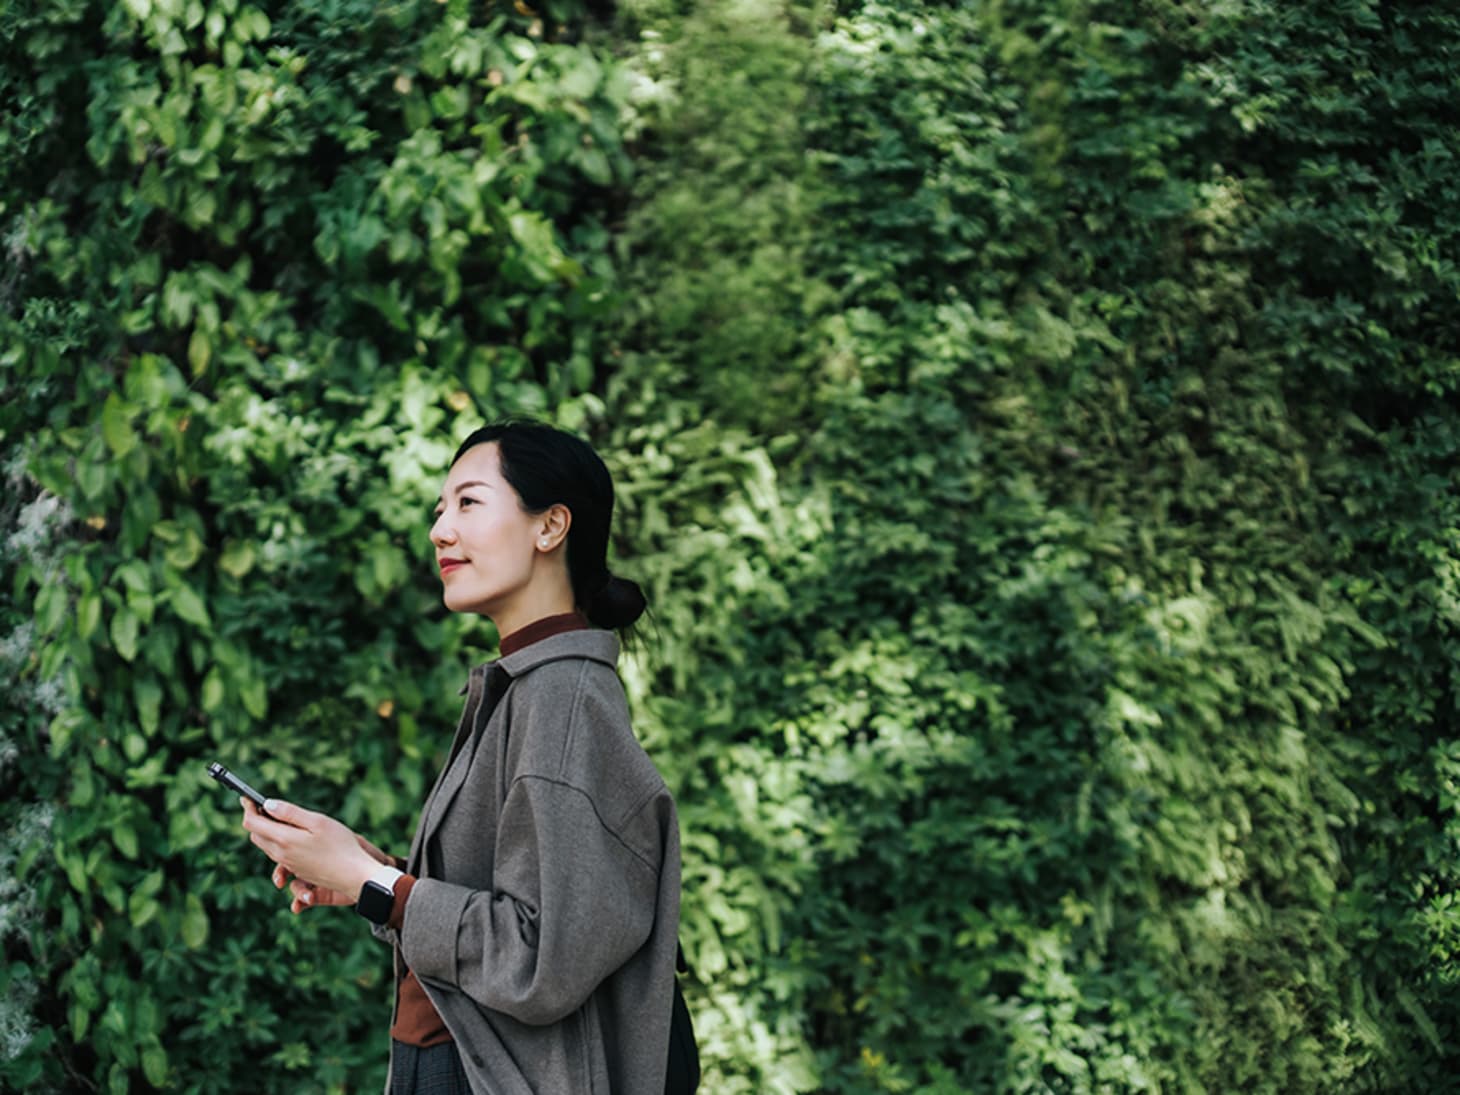 Asian woman walking with phone in front of greenery 